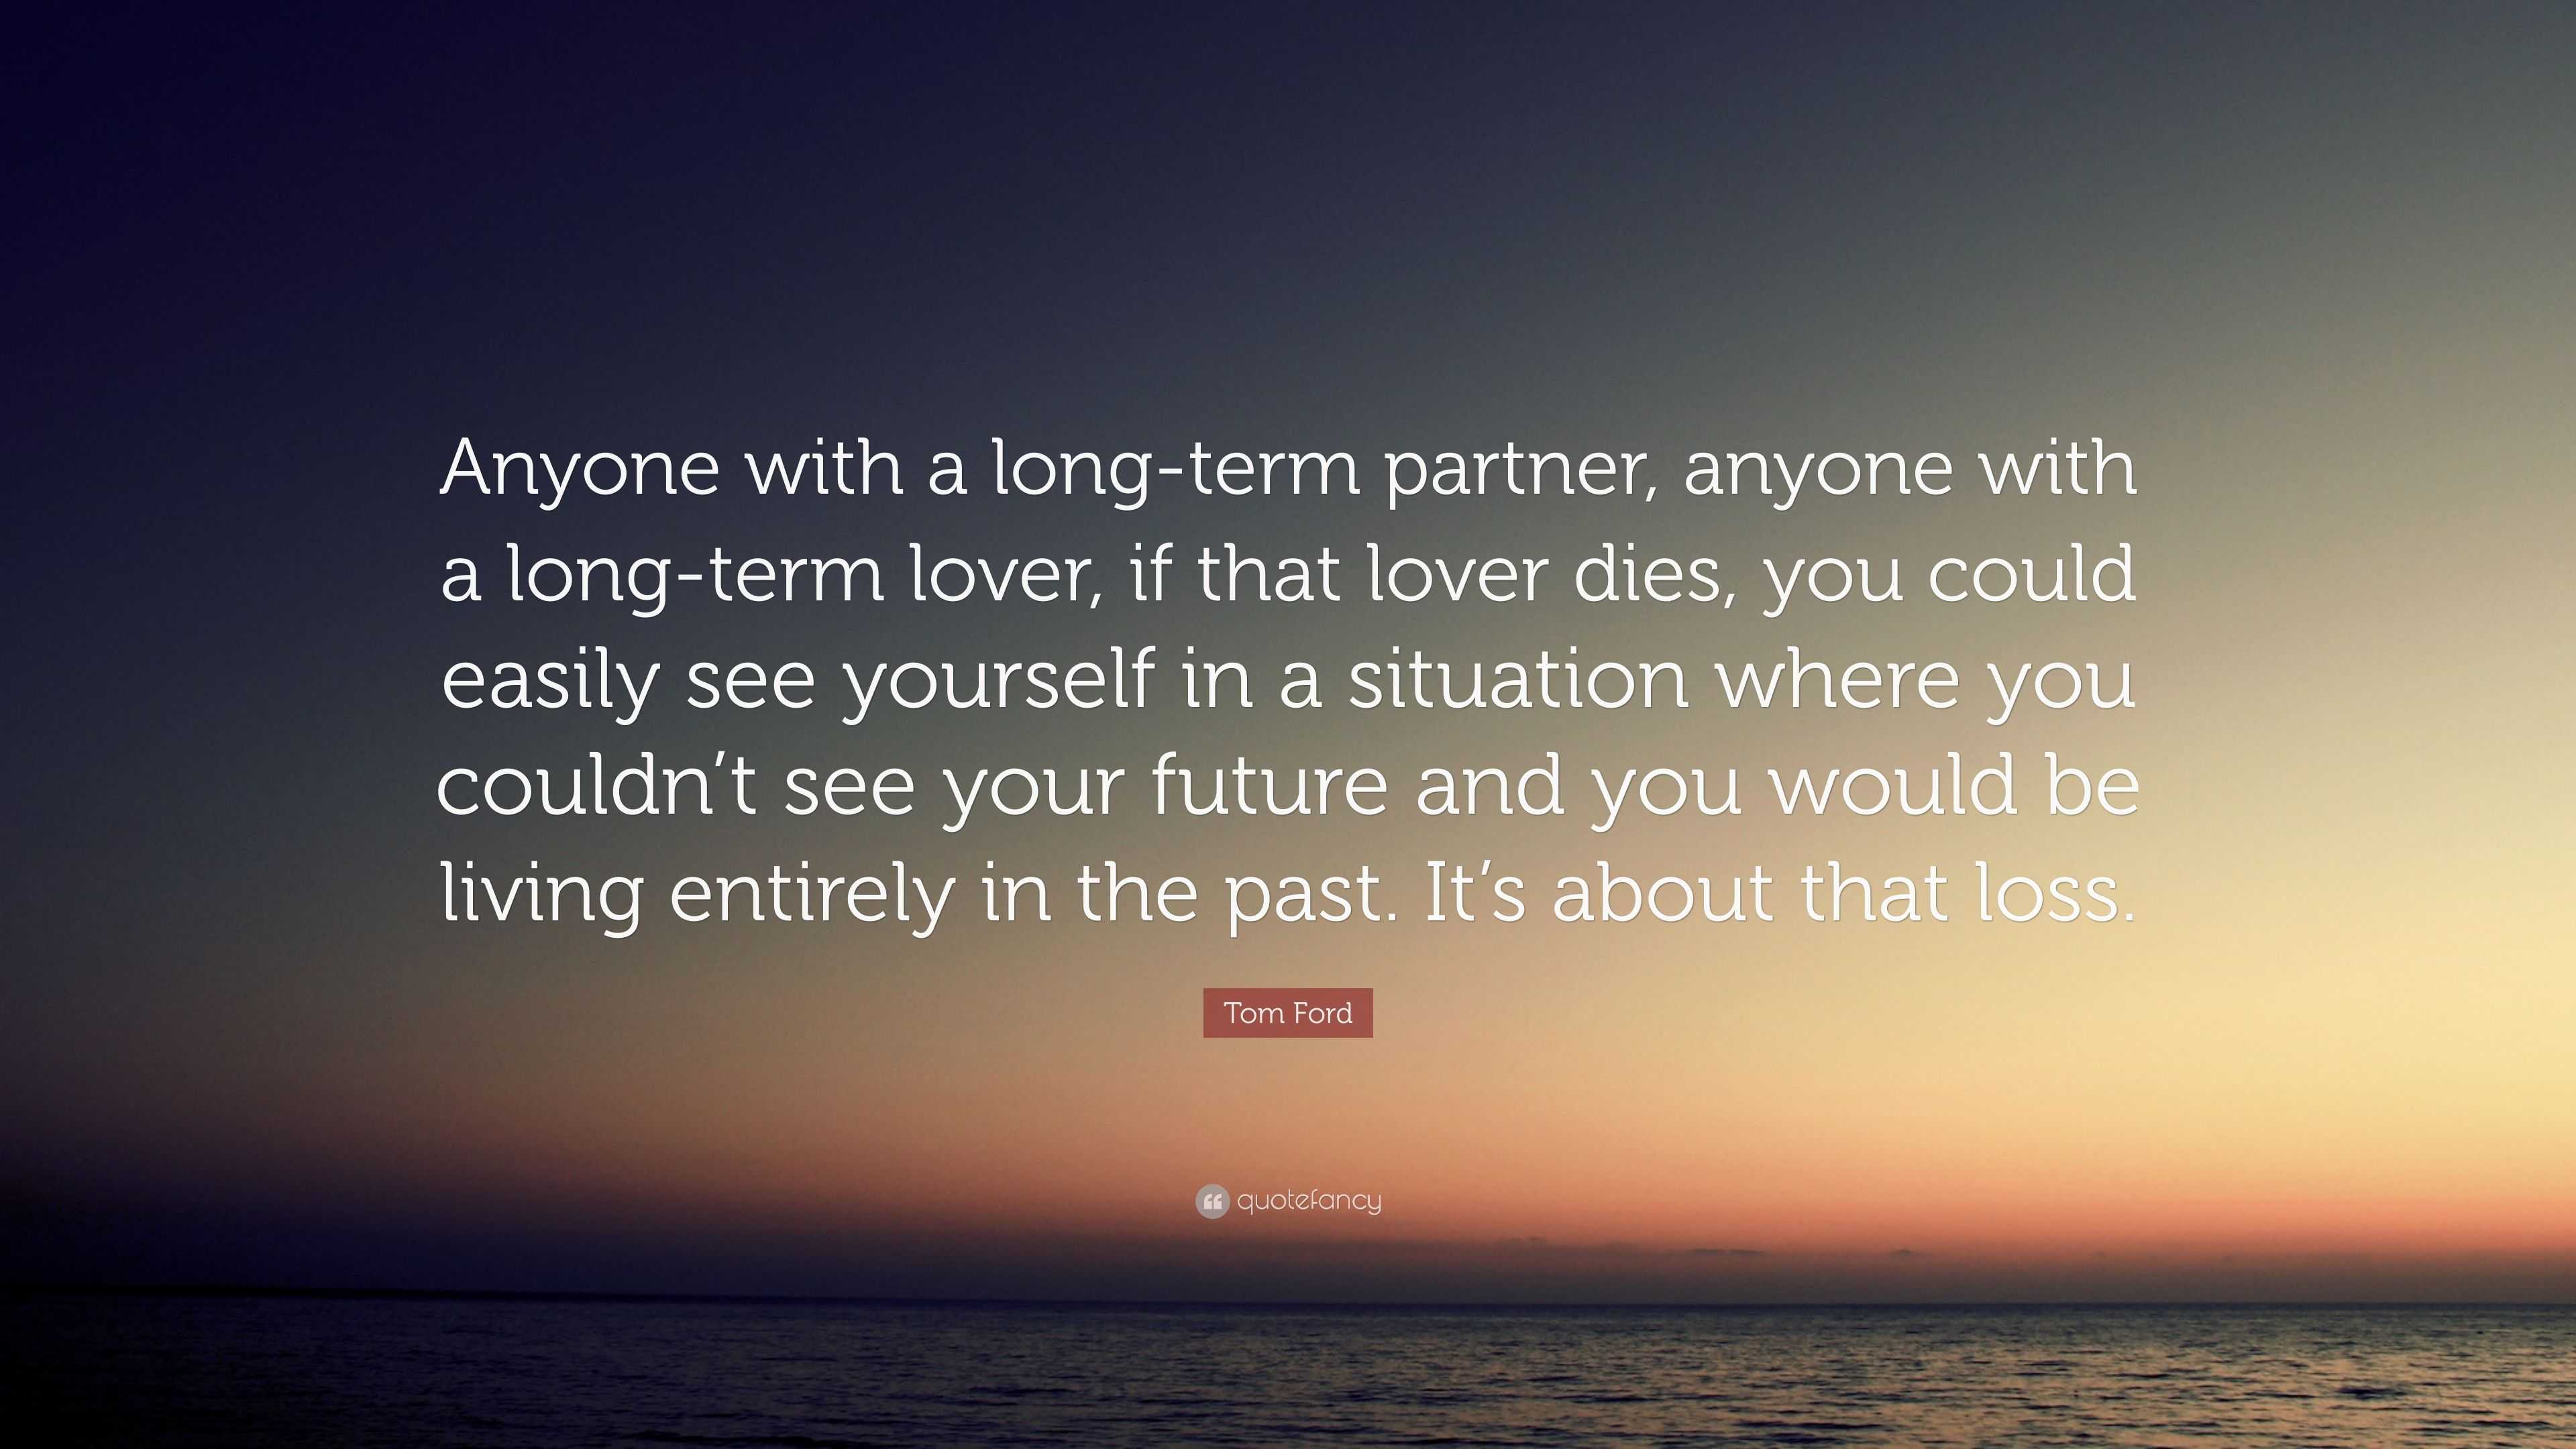 Tom Ford Quote: “Anyone with a long-term partner, anyone with a long-term  lover, if that lover dies, you could easily see yourself in a s...”